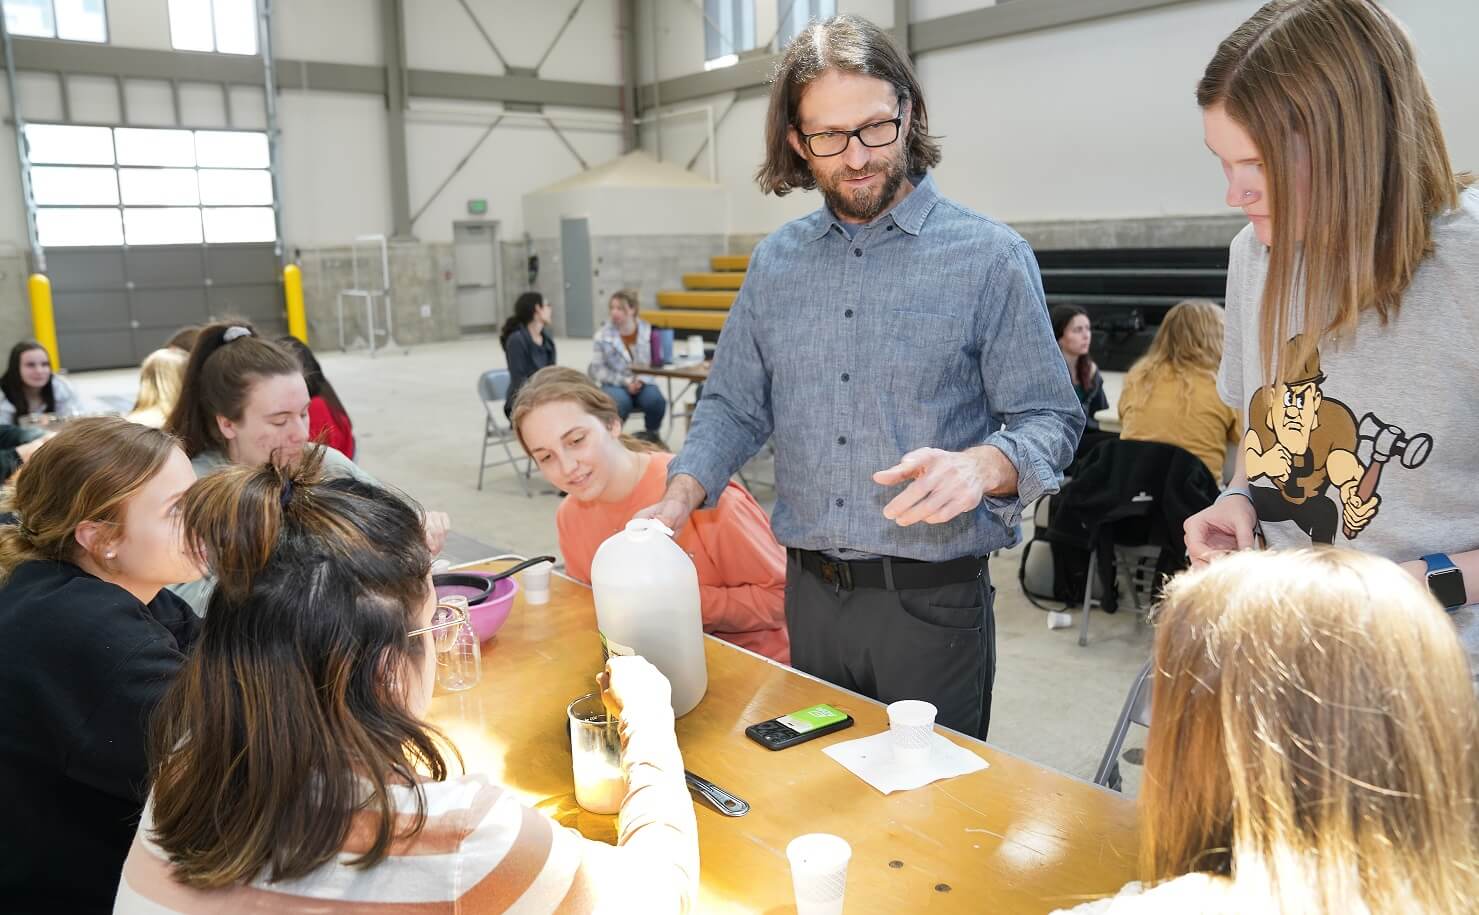 Paul Ebner works with Purdue students to make yogurt, photo by Tom Campbell